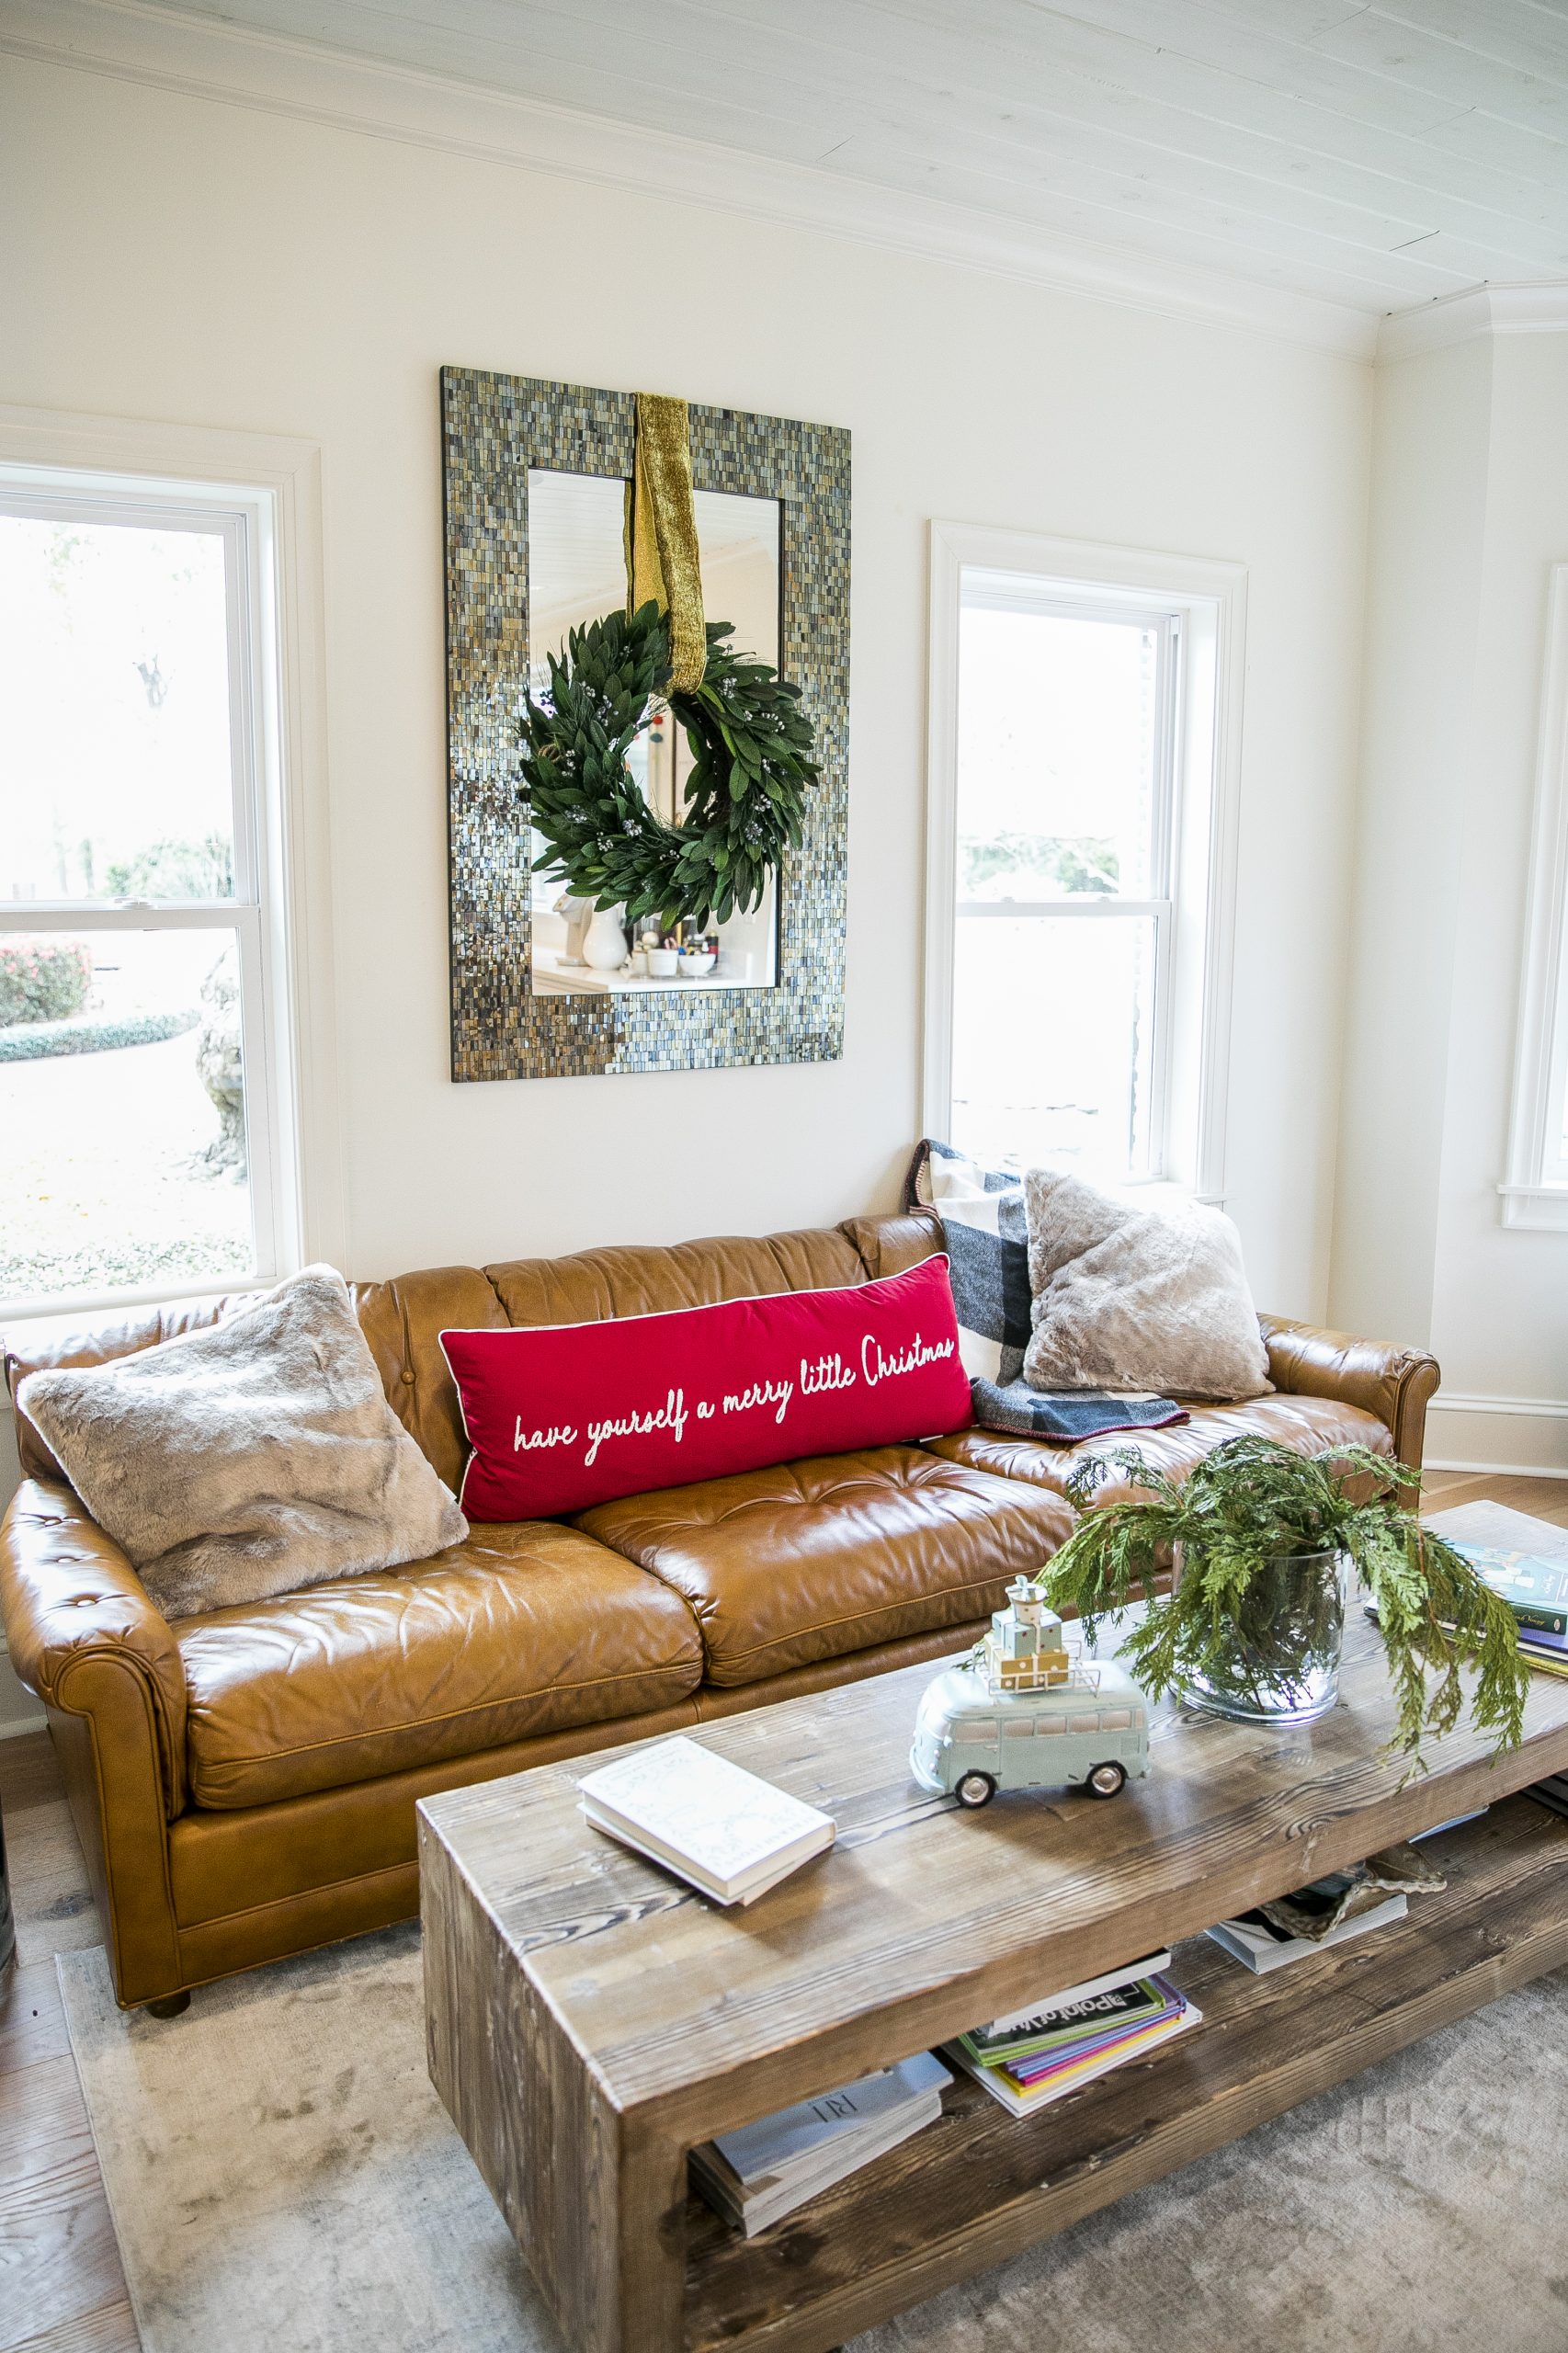 Chateau Chic Christmas House 2 2019

(Misty Leigh McElroy)
12/23/19